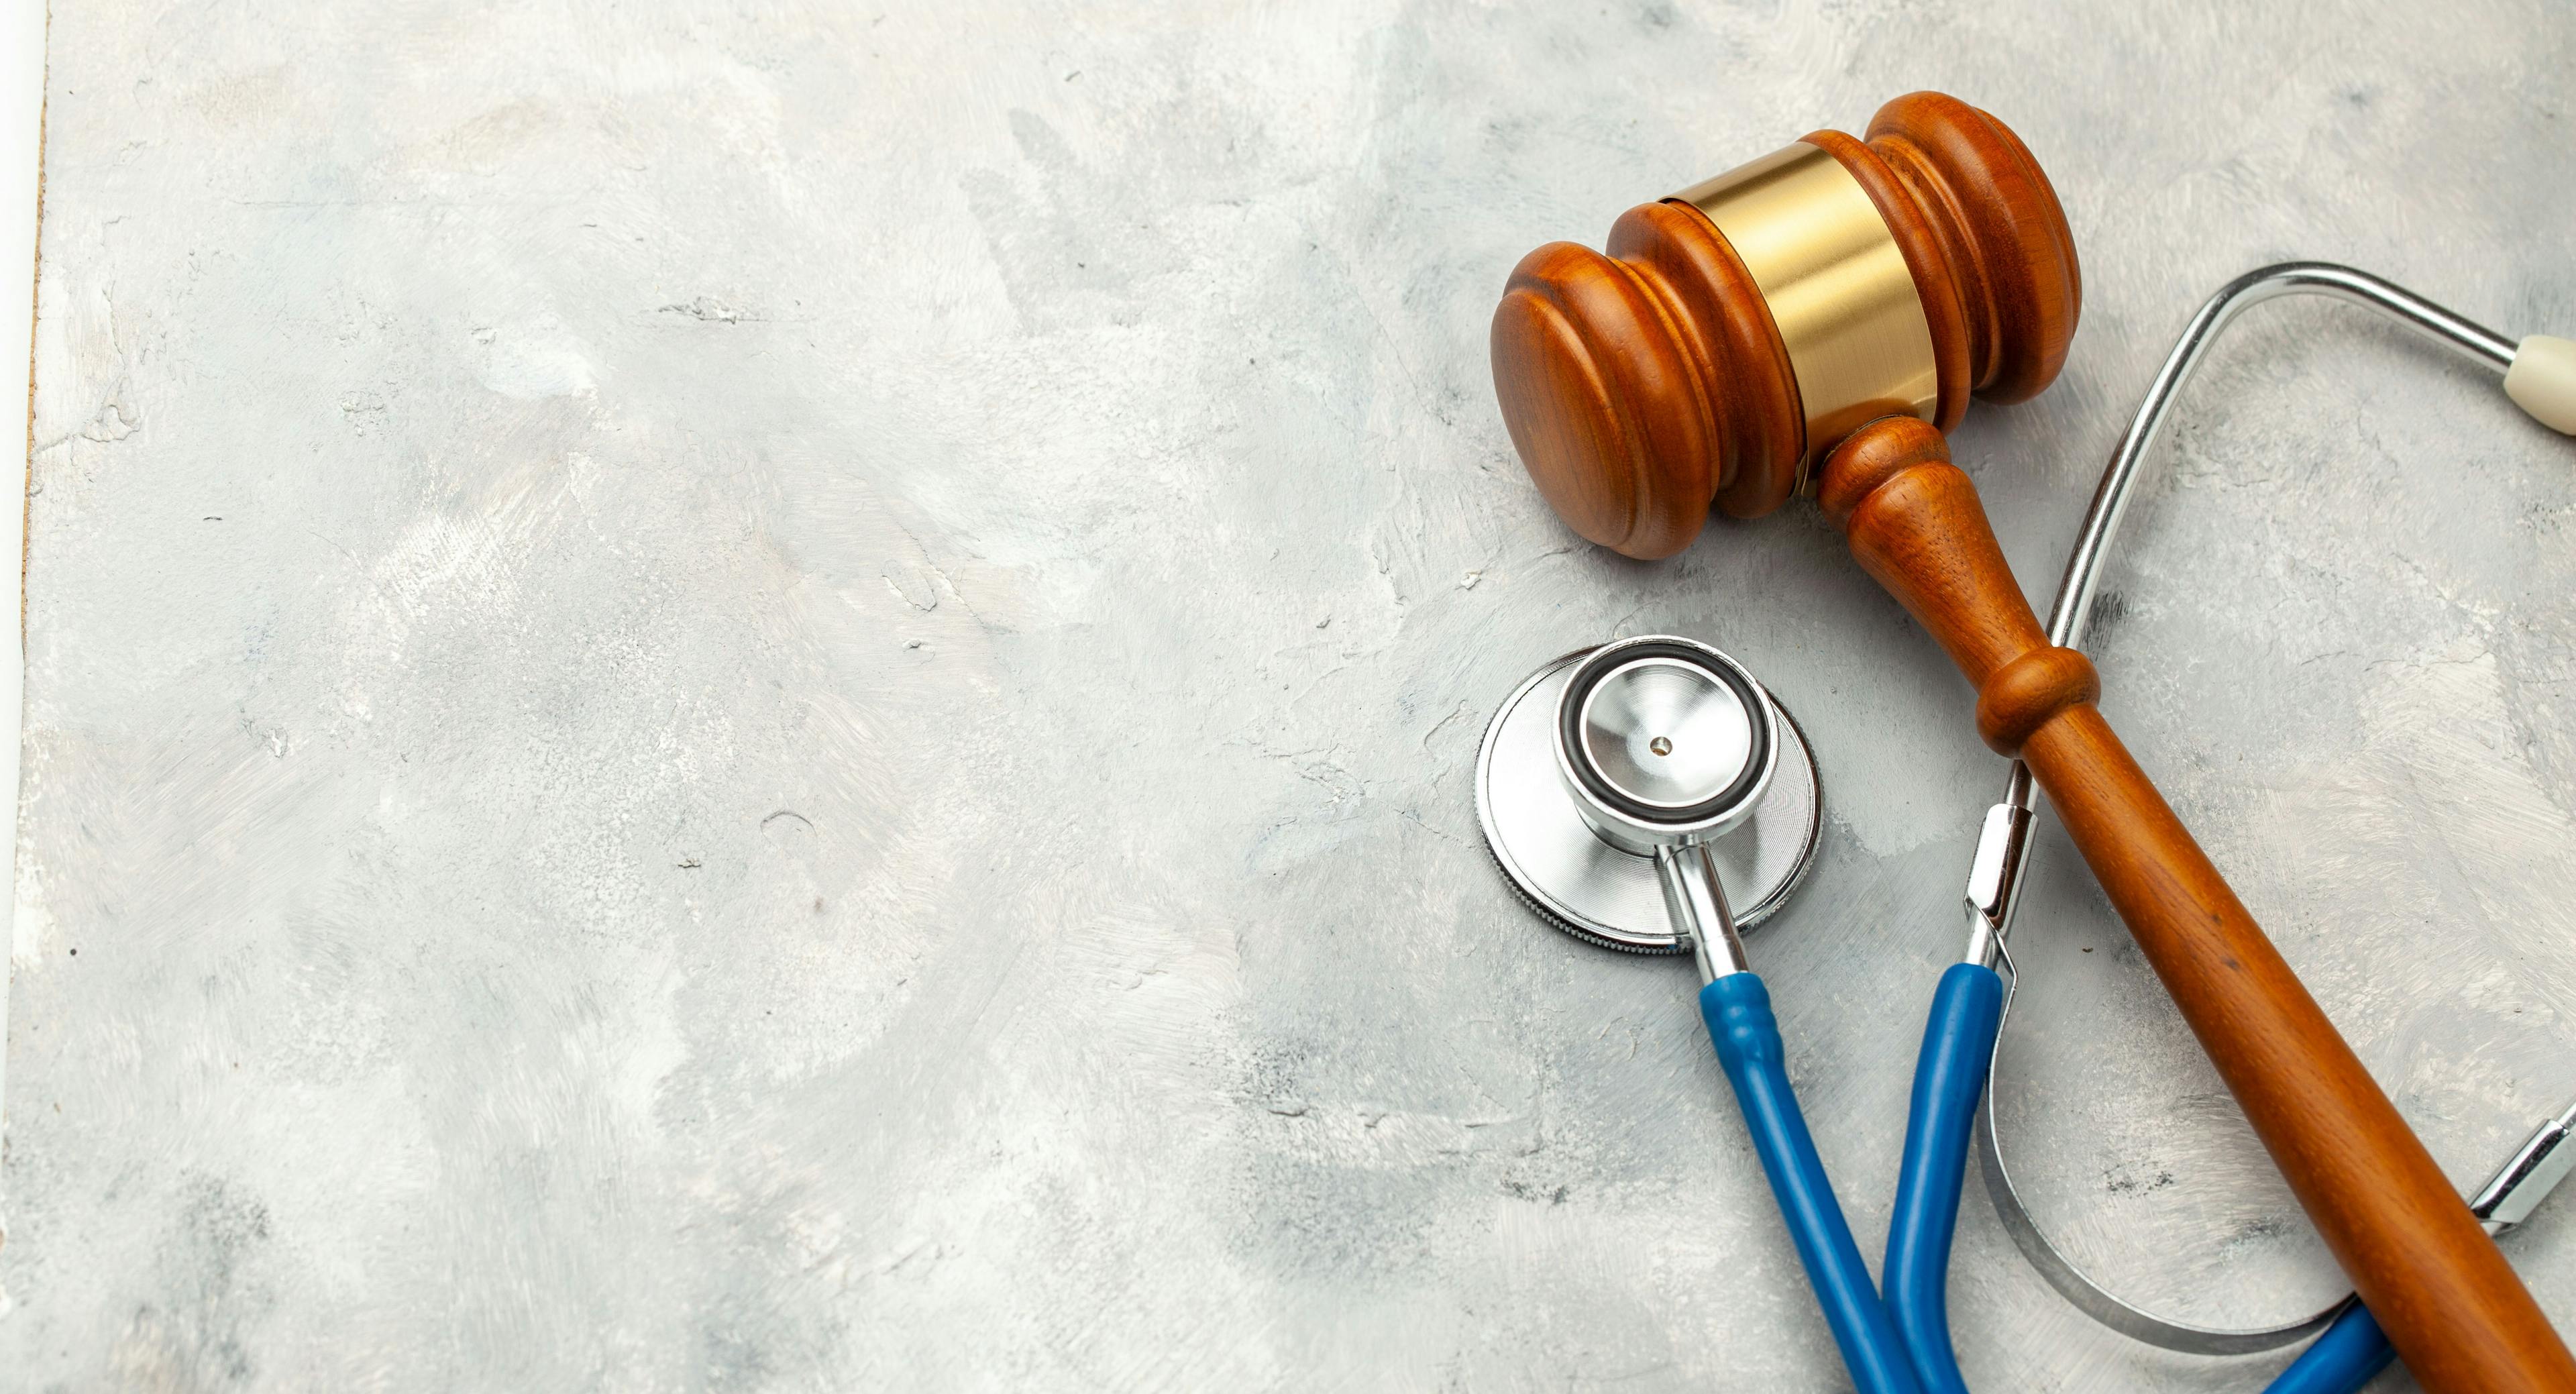 Judge gavel and stethoscope. The law in medicine, the sentence on medical negligence | Image credit: Adragan - stock.adobe.com